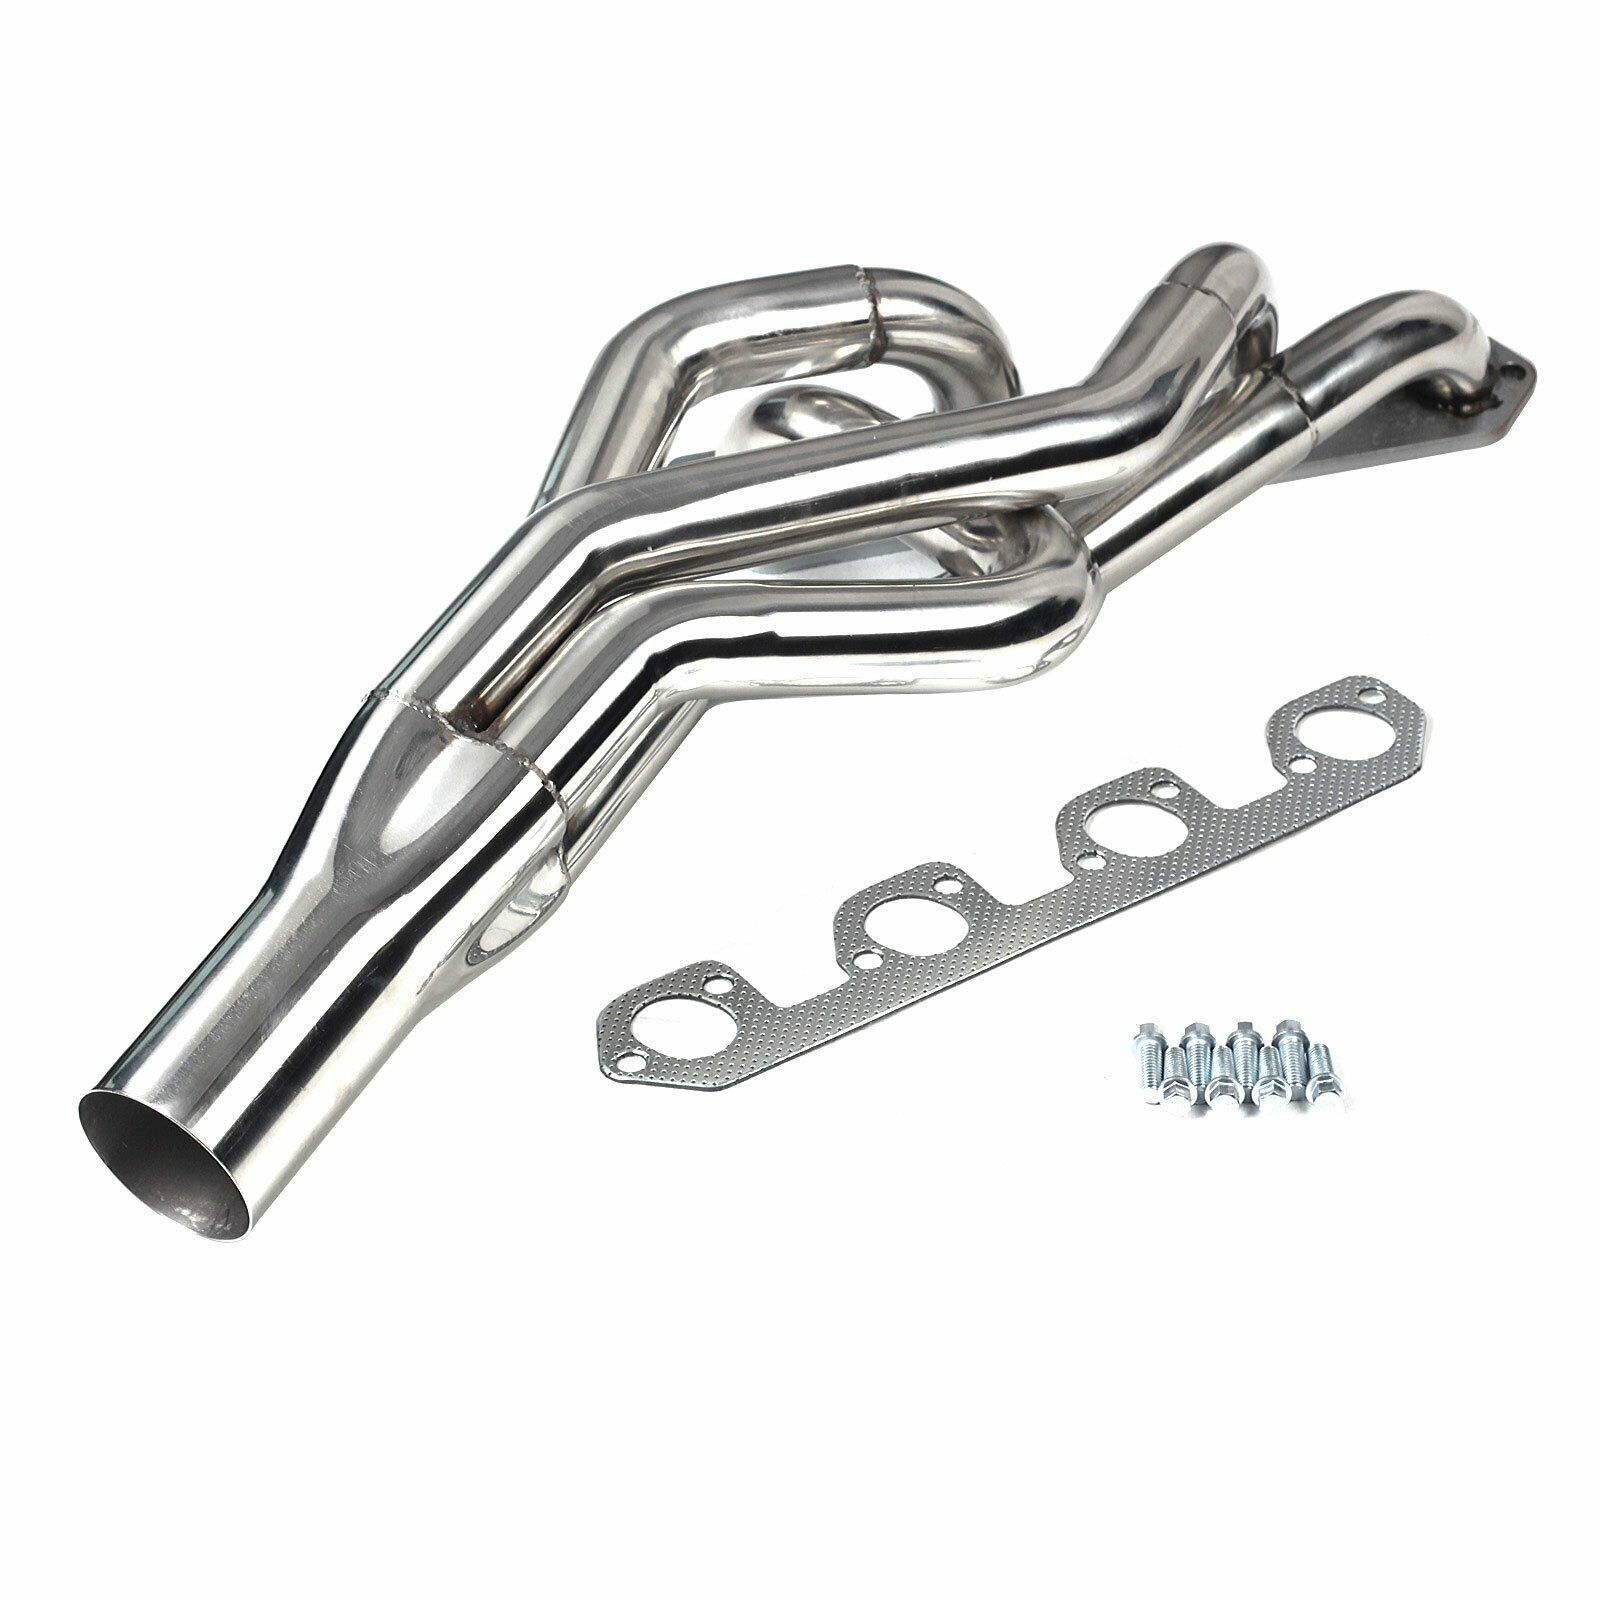 Stainless Exhaust Pipe Manifold Pro Four/4 Header For Ford Pinto Mustang II 2.3